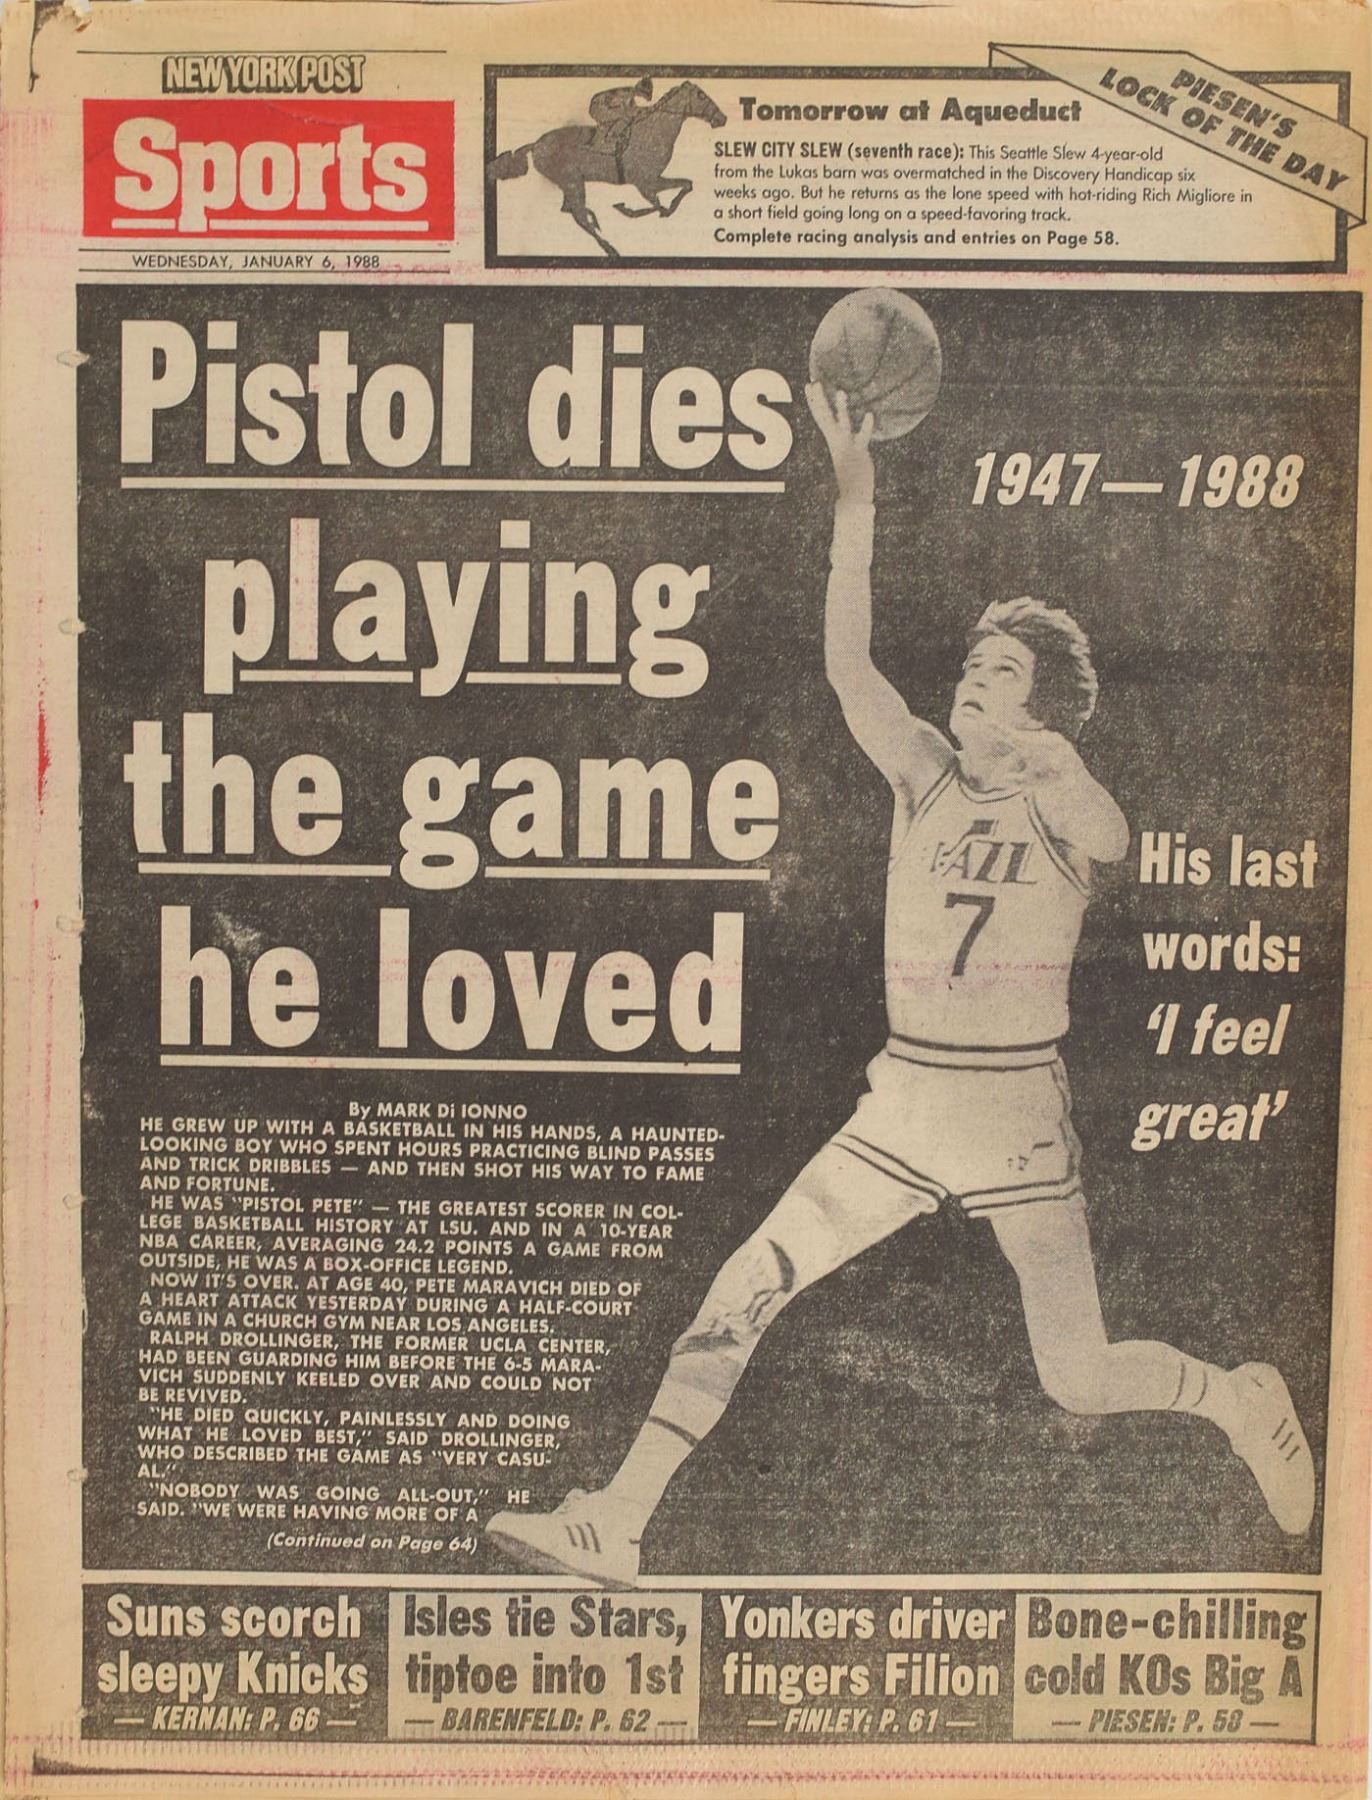 Pete Maravich FAQs – Pistol Pete Frequently Asked Questions